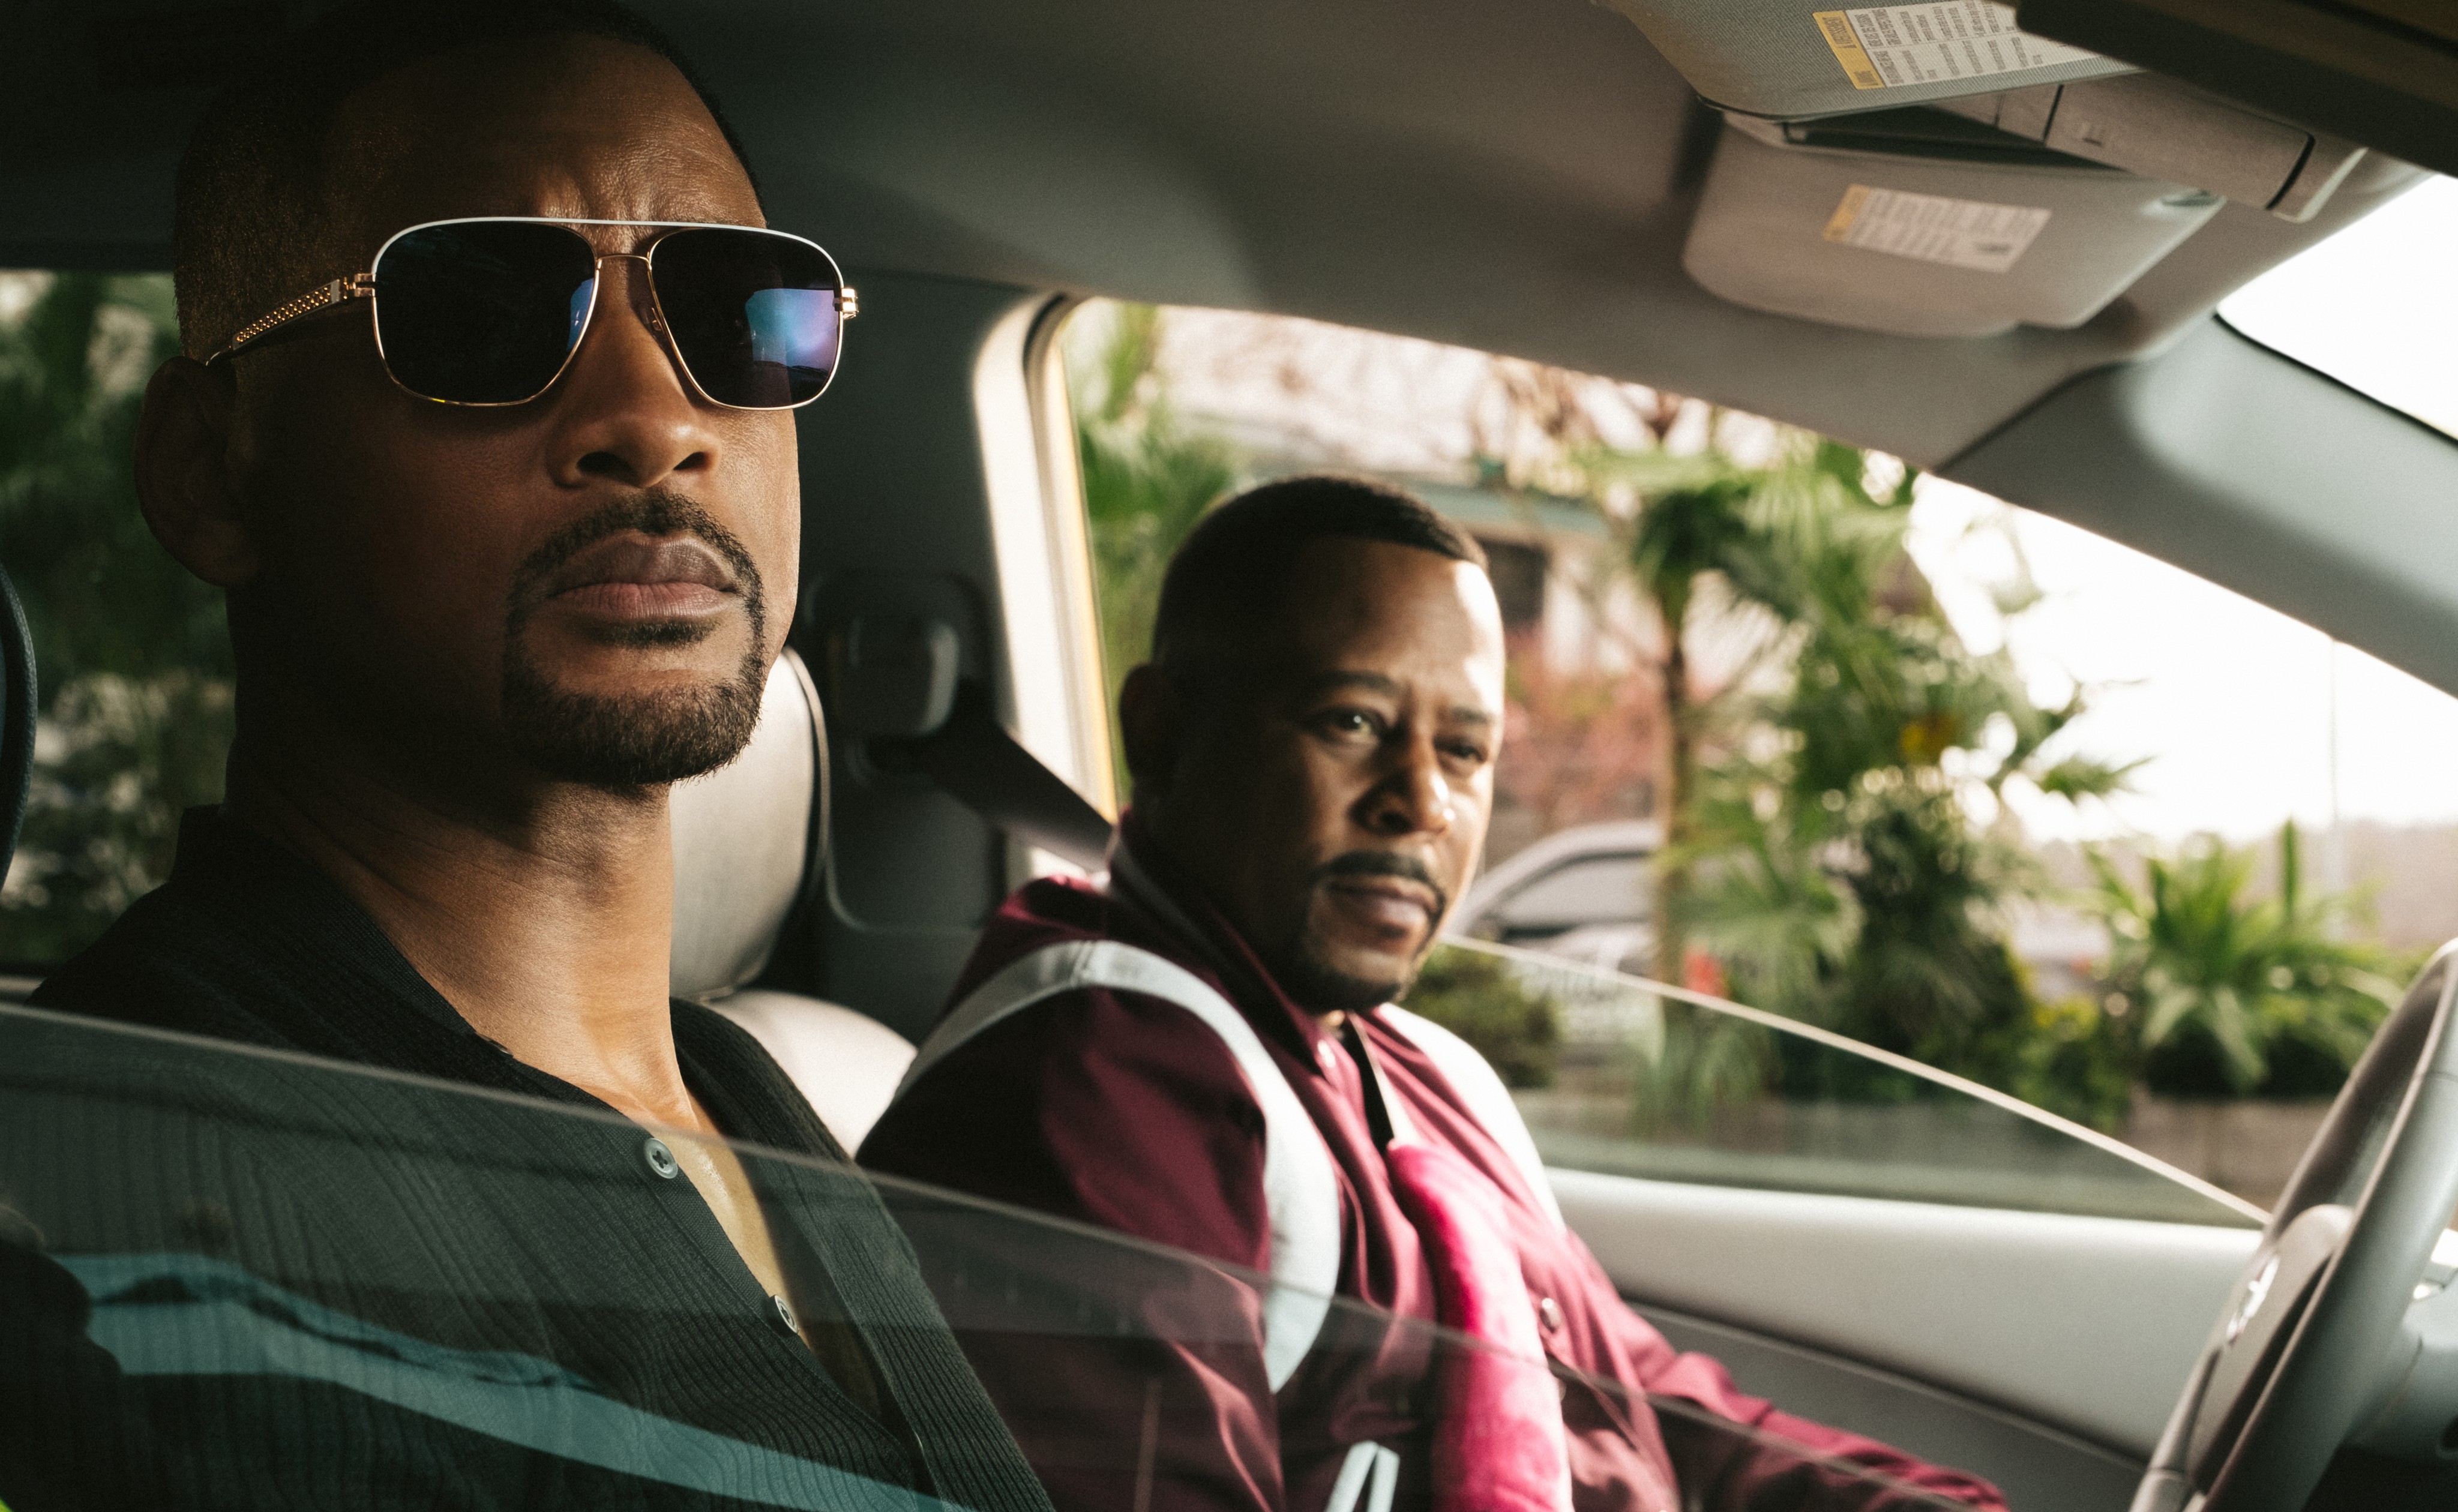 Bad Boys for Life - Rotten Tomatoes